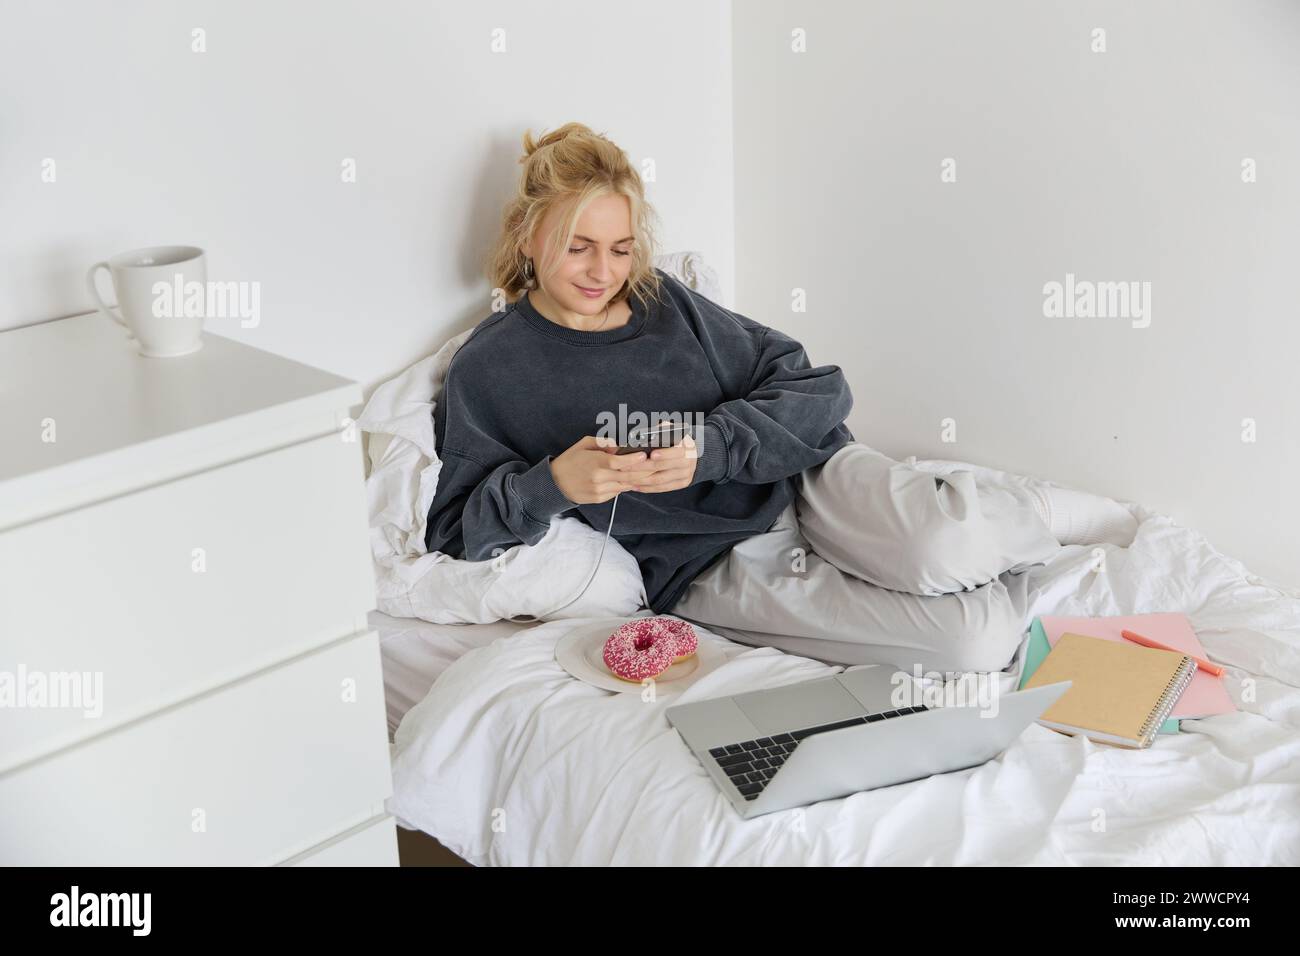 Portrait of smiling candid woman, lying in bed with doughnut, using smartphone and laptop, resting at home in bedroom, watching tv show or chatting on Stock Photo